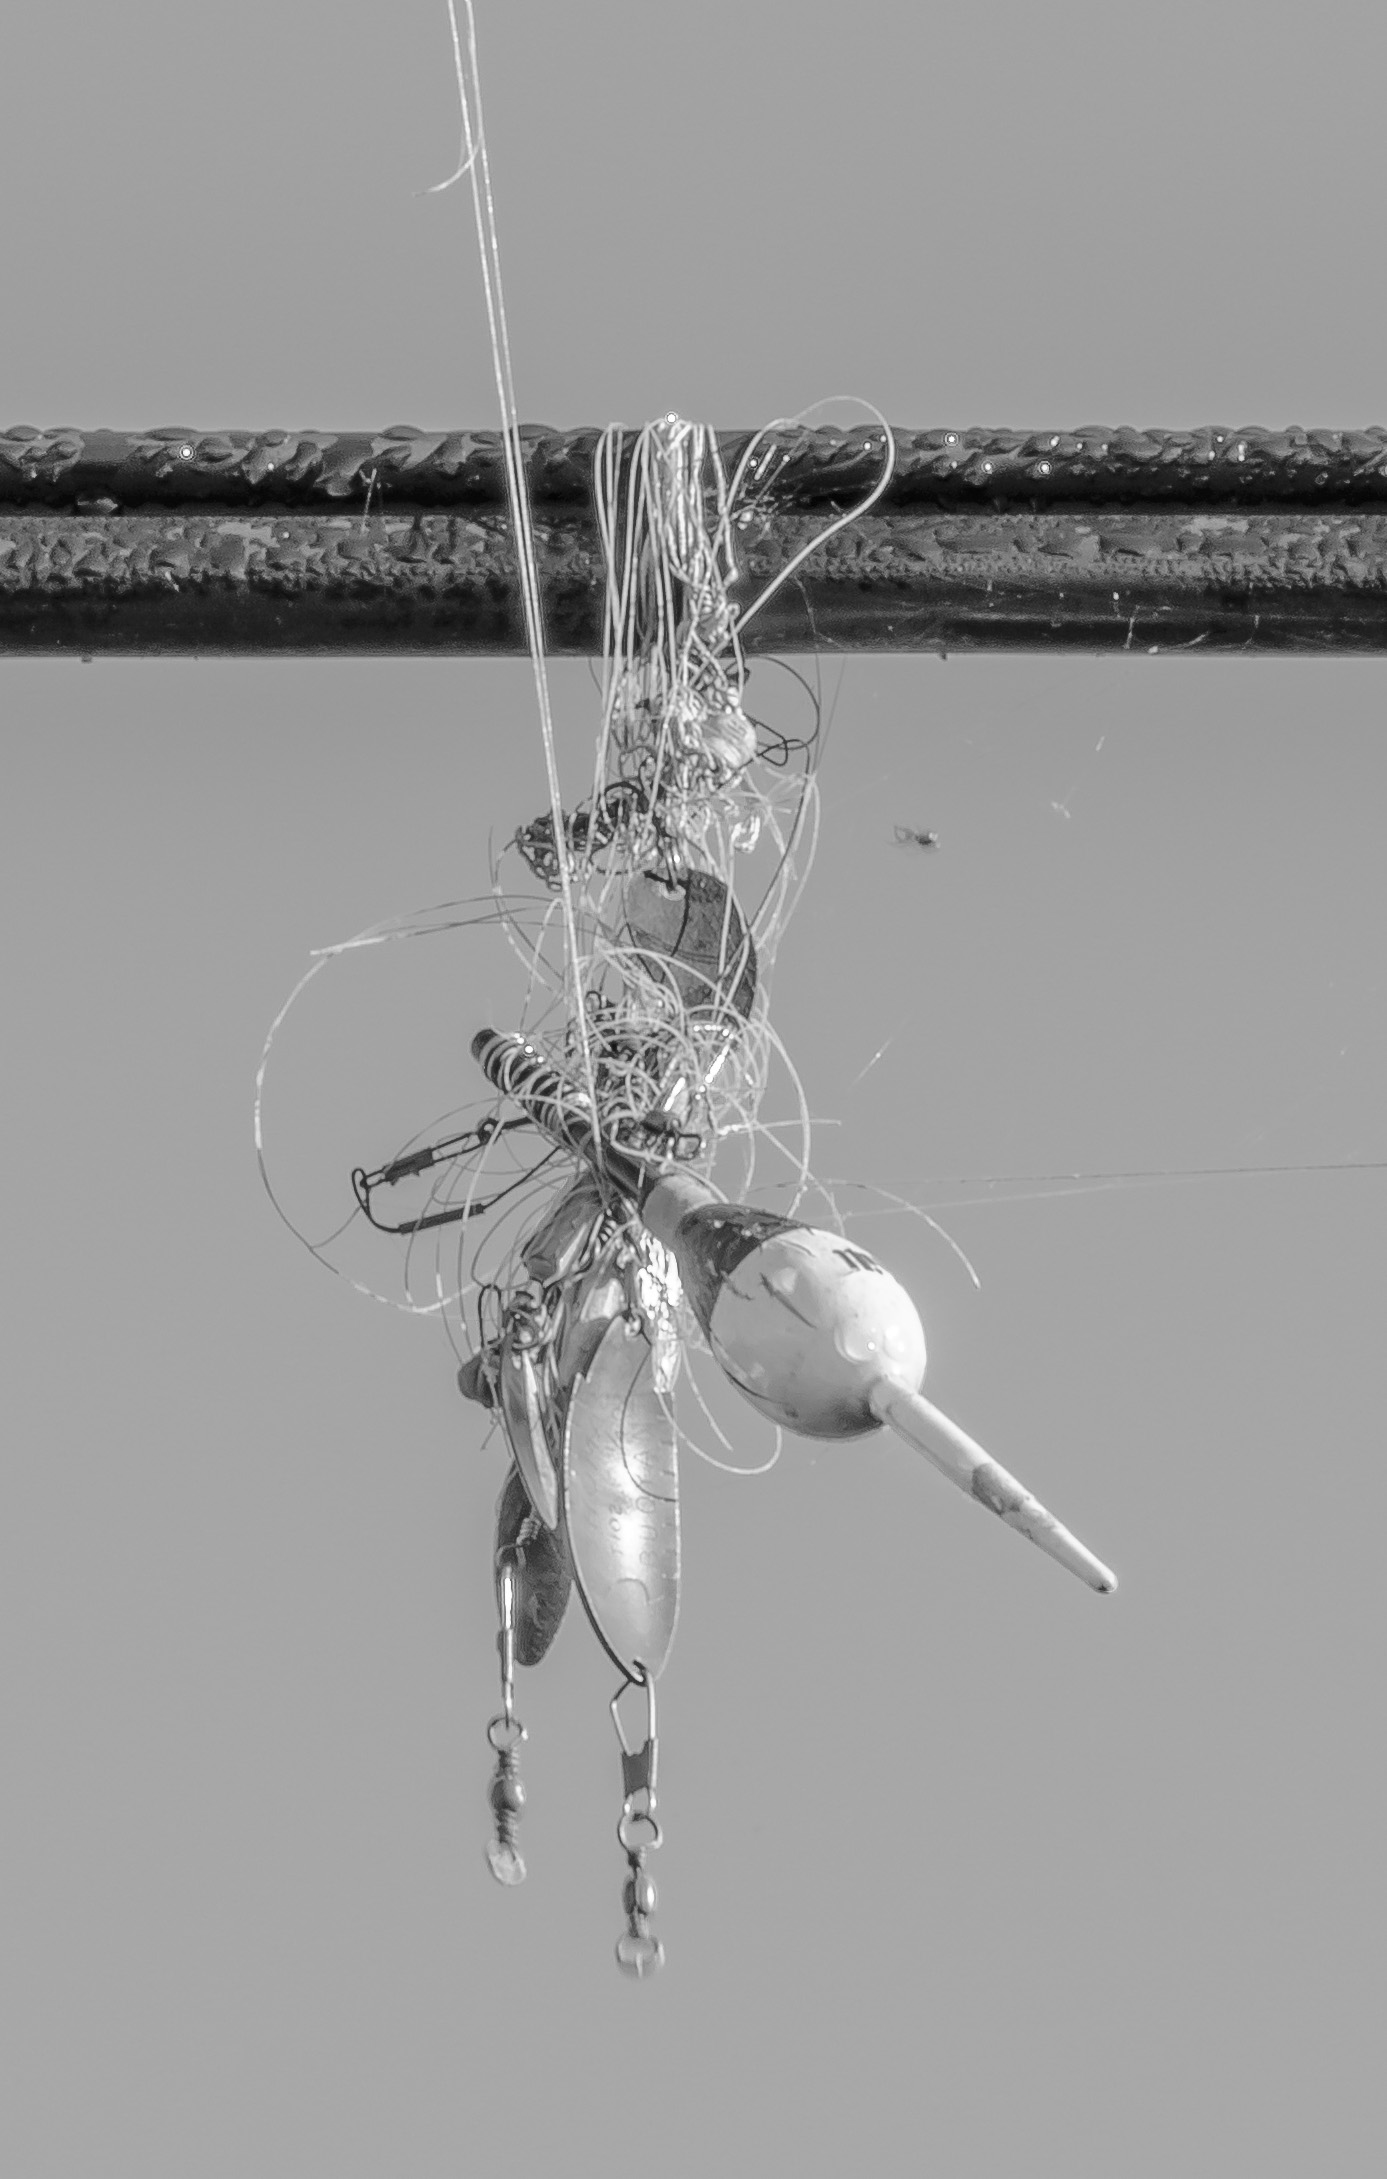 tangle of fishing line, lures, and float wrapped on utility line